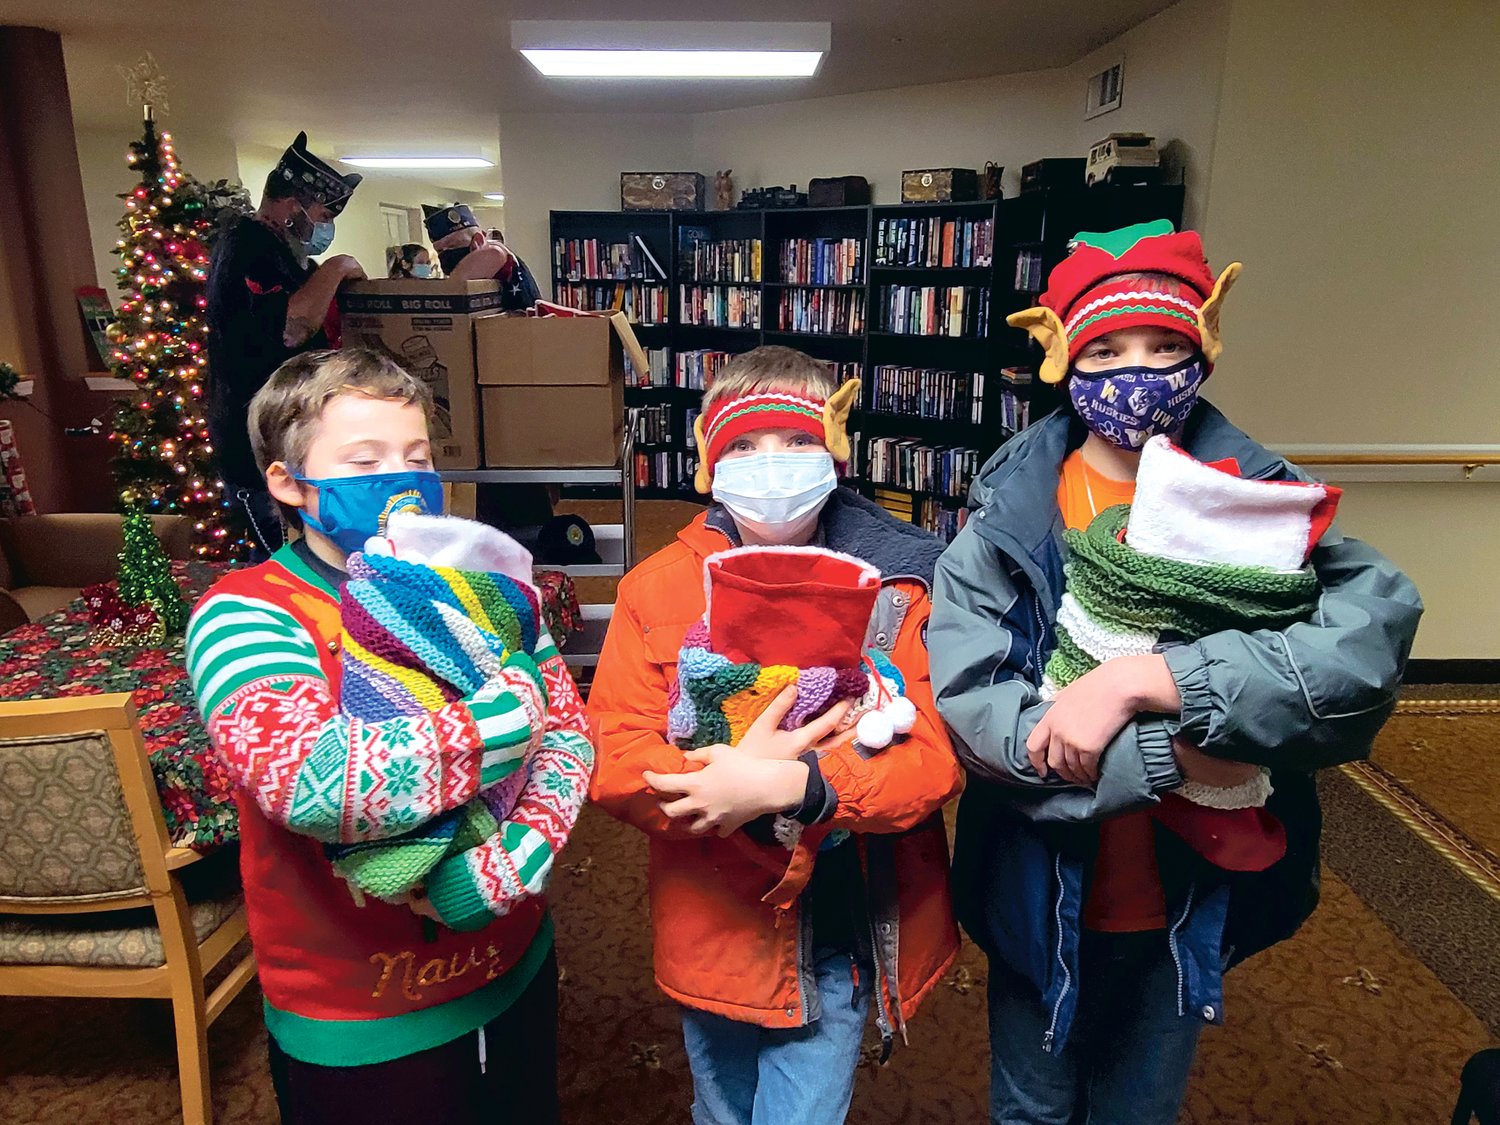 Sons of the American Legion Post 164 prepare to hand out stockings to veterans at asisted living facilities in Yelm on Tuesday, Dec. 21.